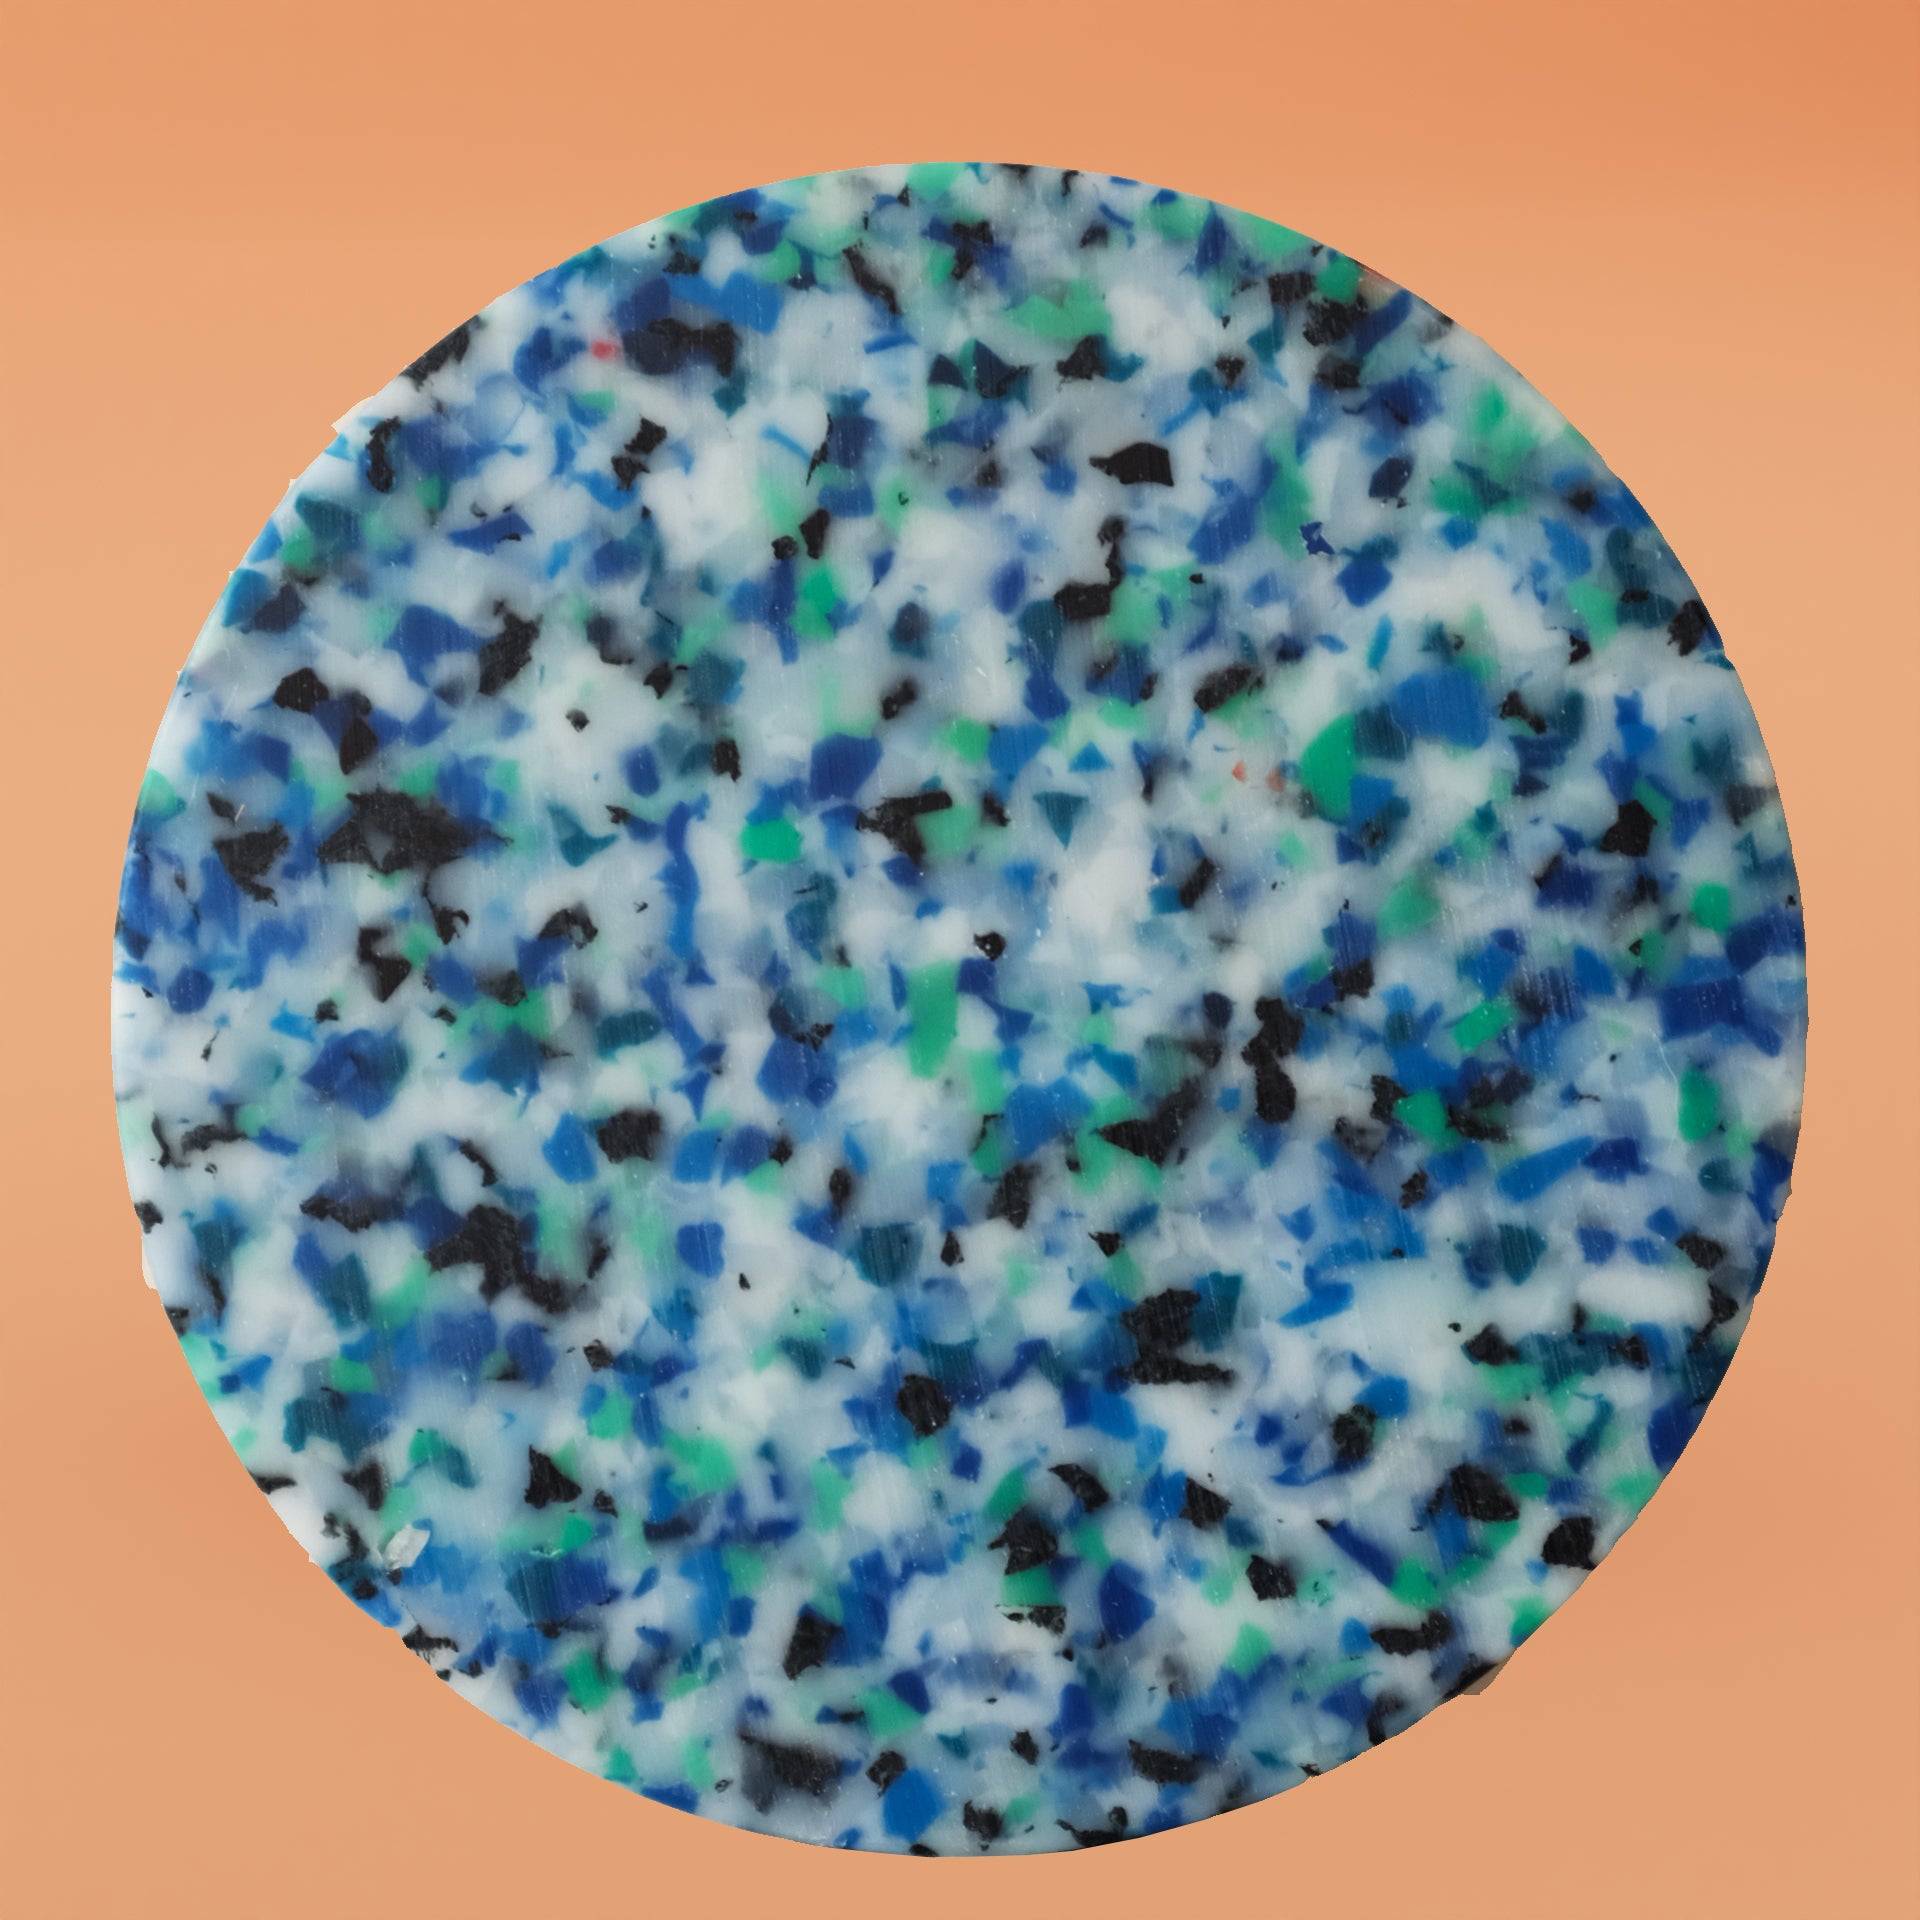 BLUE MEDIUM CIRCLE CHARCUTERIE CUTTING BOARD BY THE MINIMONO PROJECT - BRAND FOR ECO FRIENDLY - PLAYFUL - MULTI FUNCTIONAL - SUSTAINABLE - HIGH QUALITY - DESIGN FURNITURE FROM RECYCLED PLASTIC FOR BOTH ADULT AND CHILDREN MADE IN BERLIN GERMANY